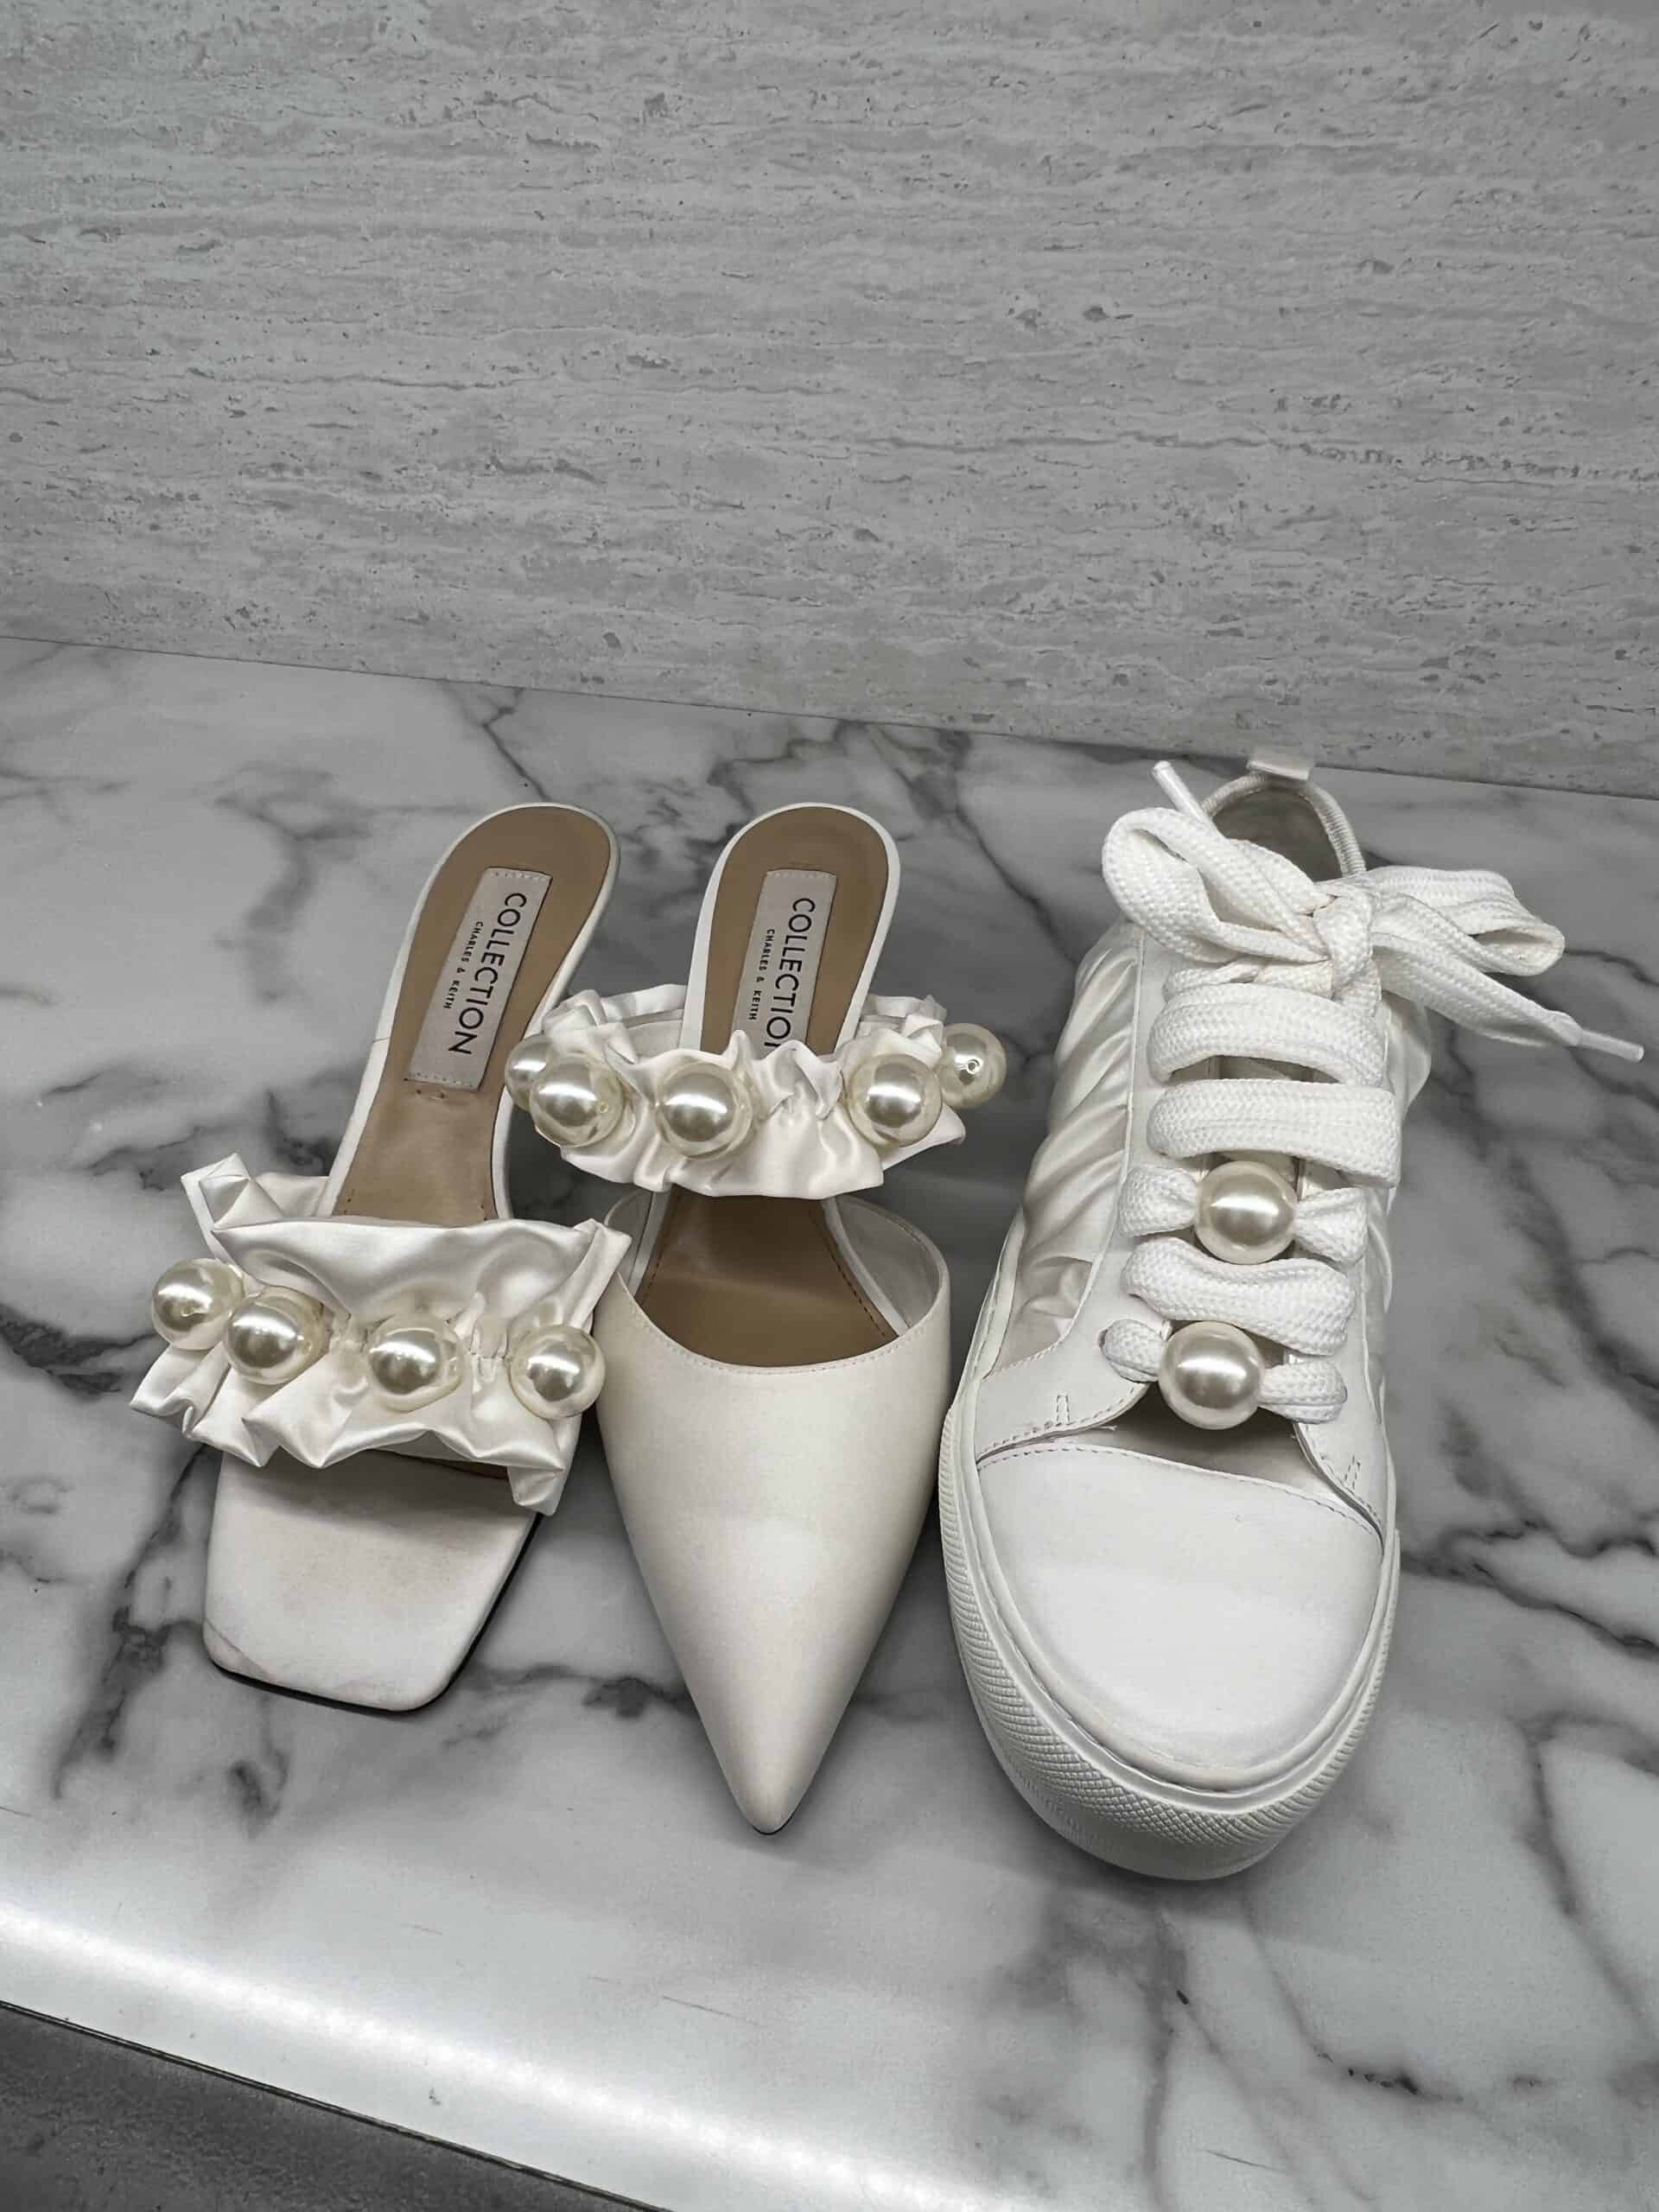 retail women ss23 party casual sneakers sandals scarpins mule kitten leather satin ruffles pearls white charleskeith